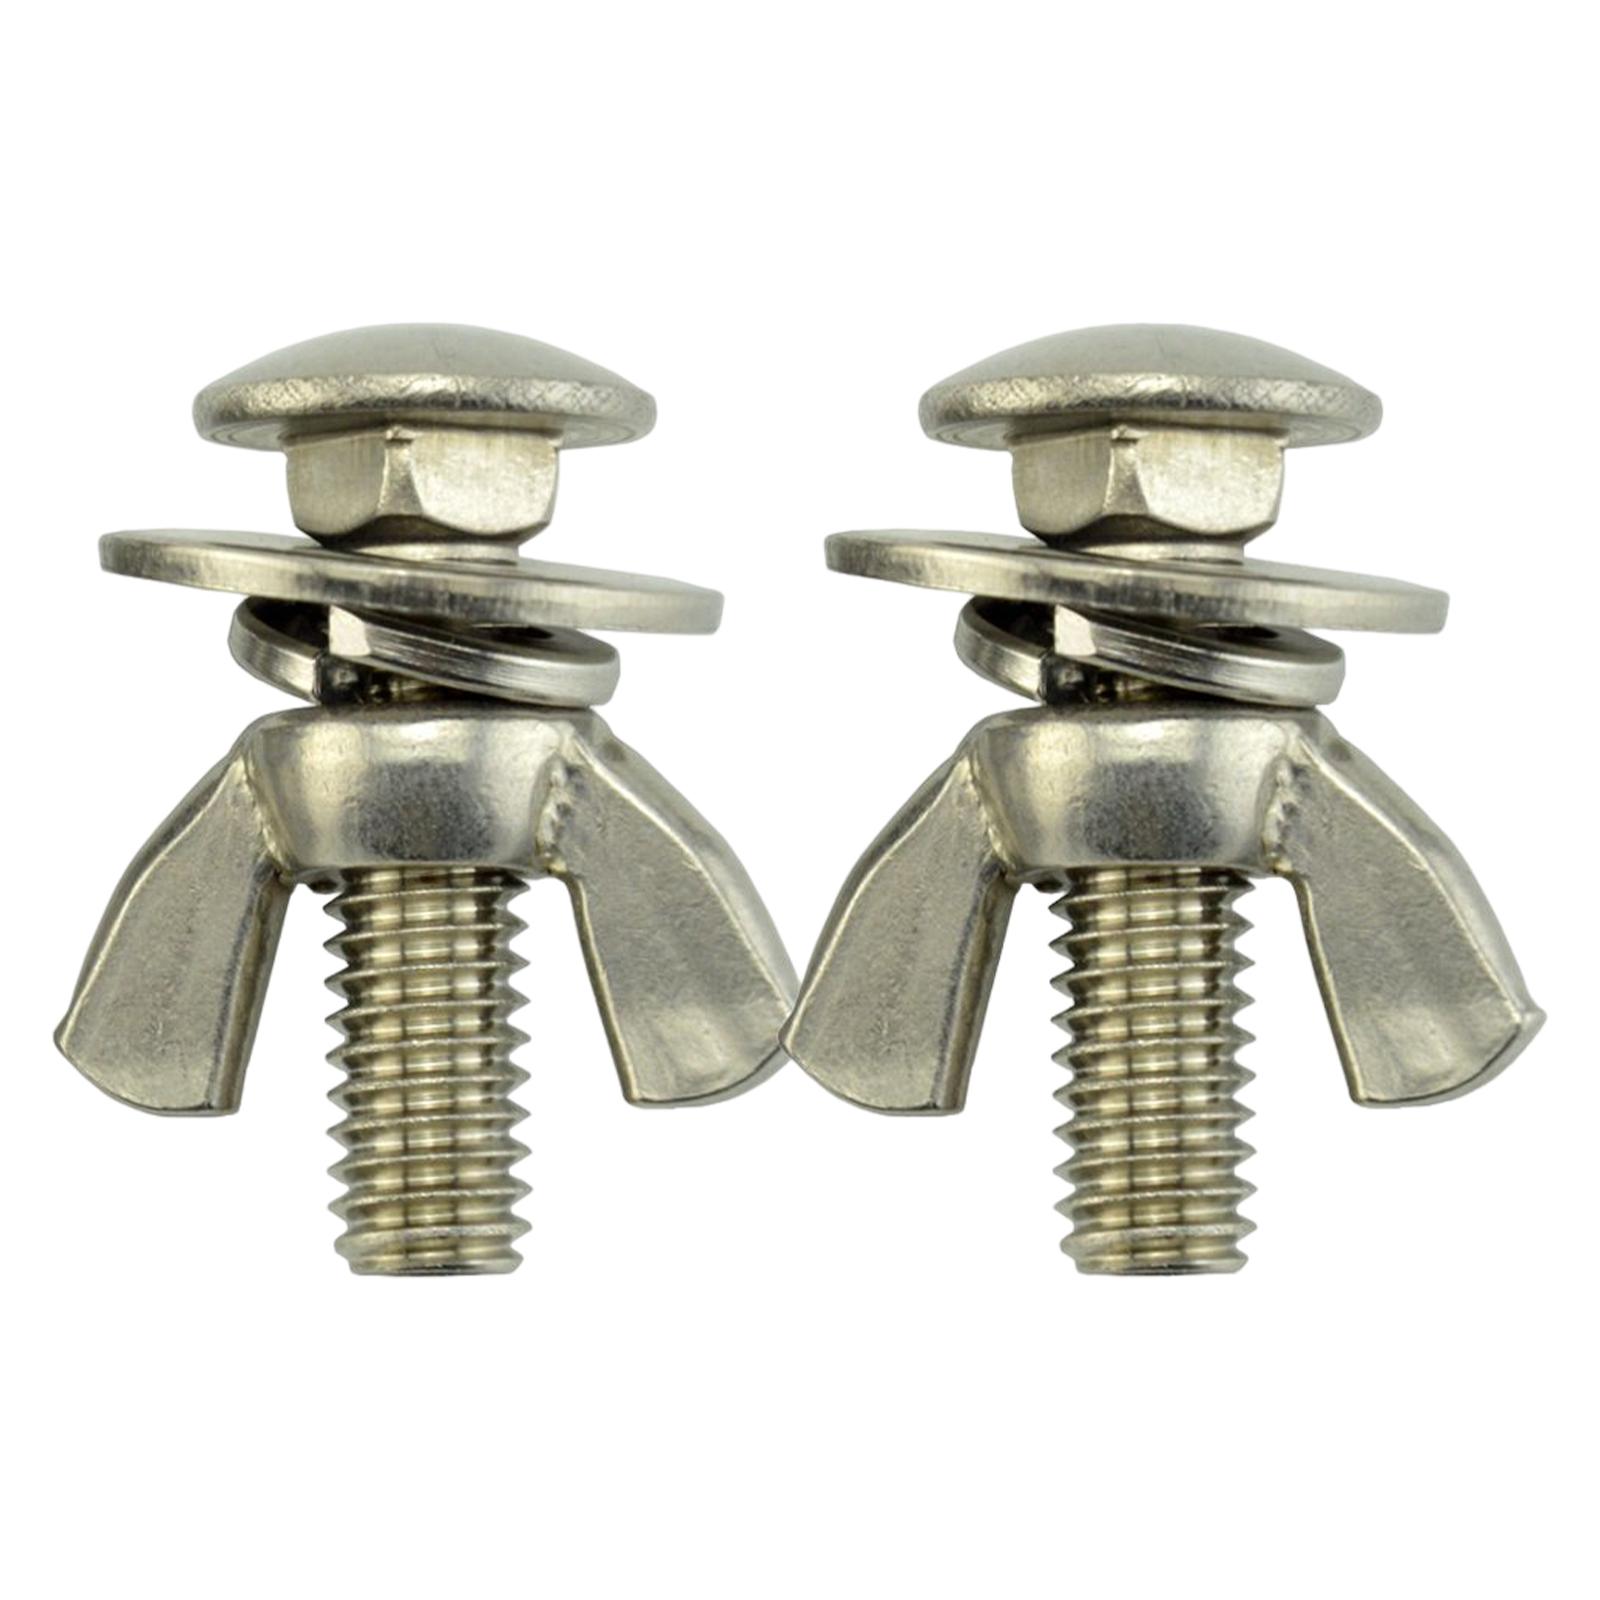 2Pcs Tech Diving Butterfly Screw s Wing Nuts Thumb Screws Fastener 316 Stainless for Backplates Accessories, Rust Resistance - image 1 of 5